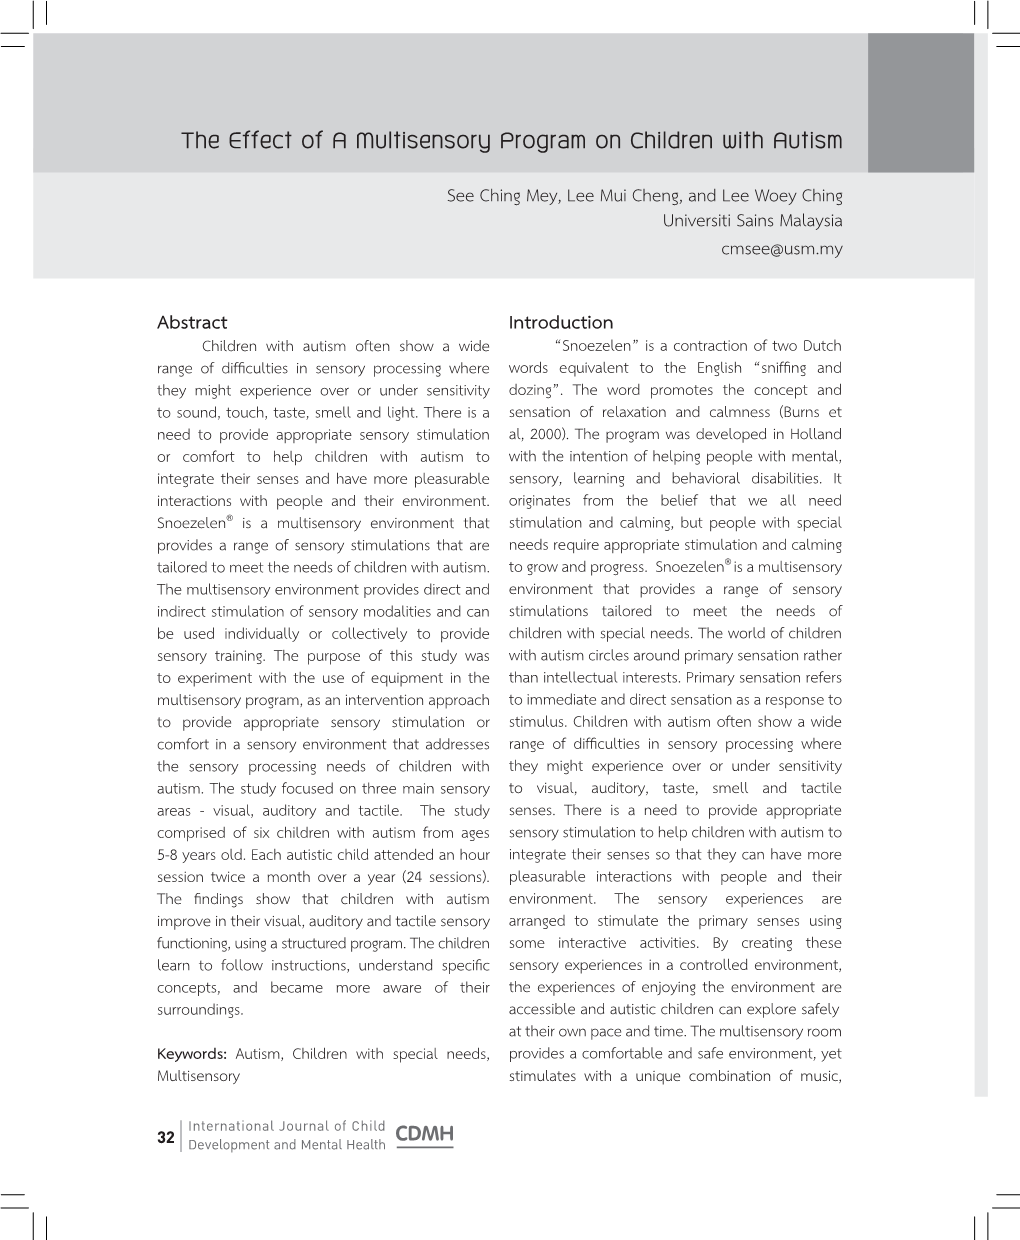 The Effect of a Multisensory Program on Children with Autism